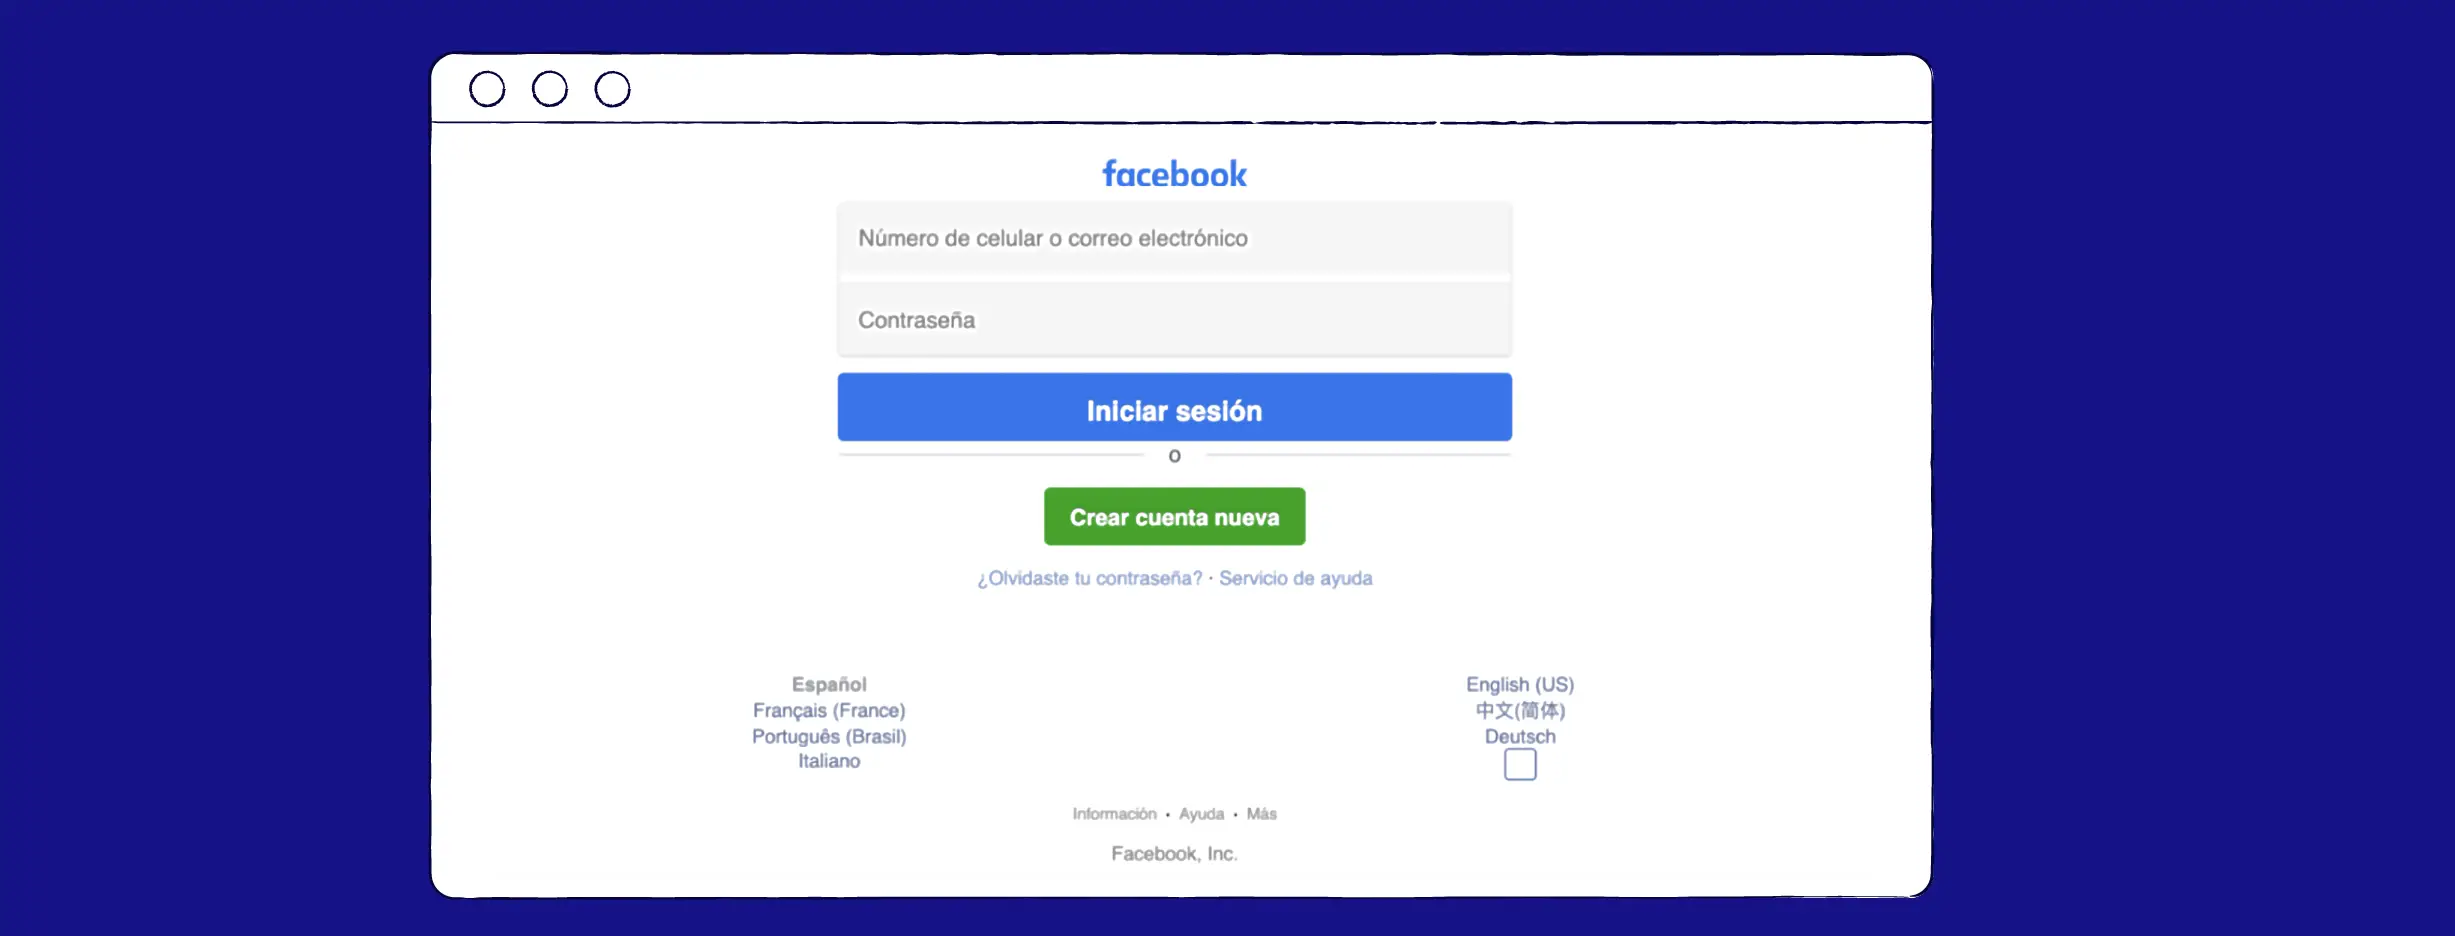 A fake Facebook page in Spanish.